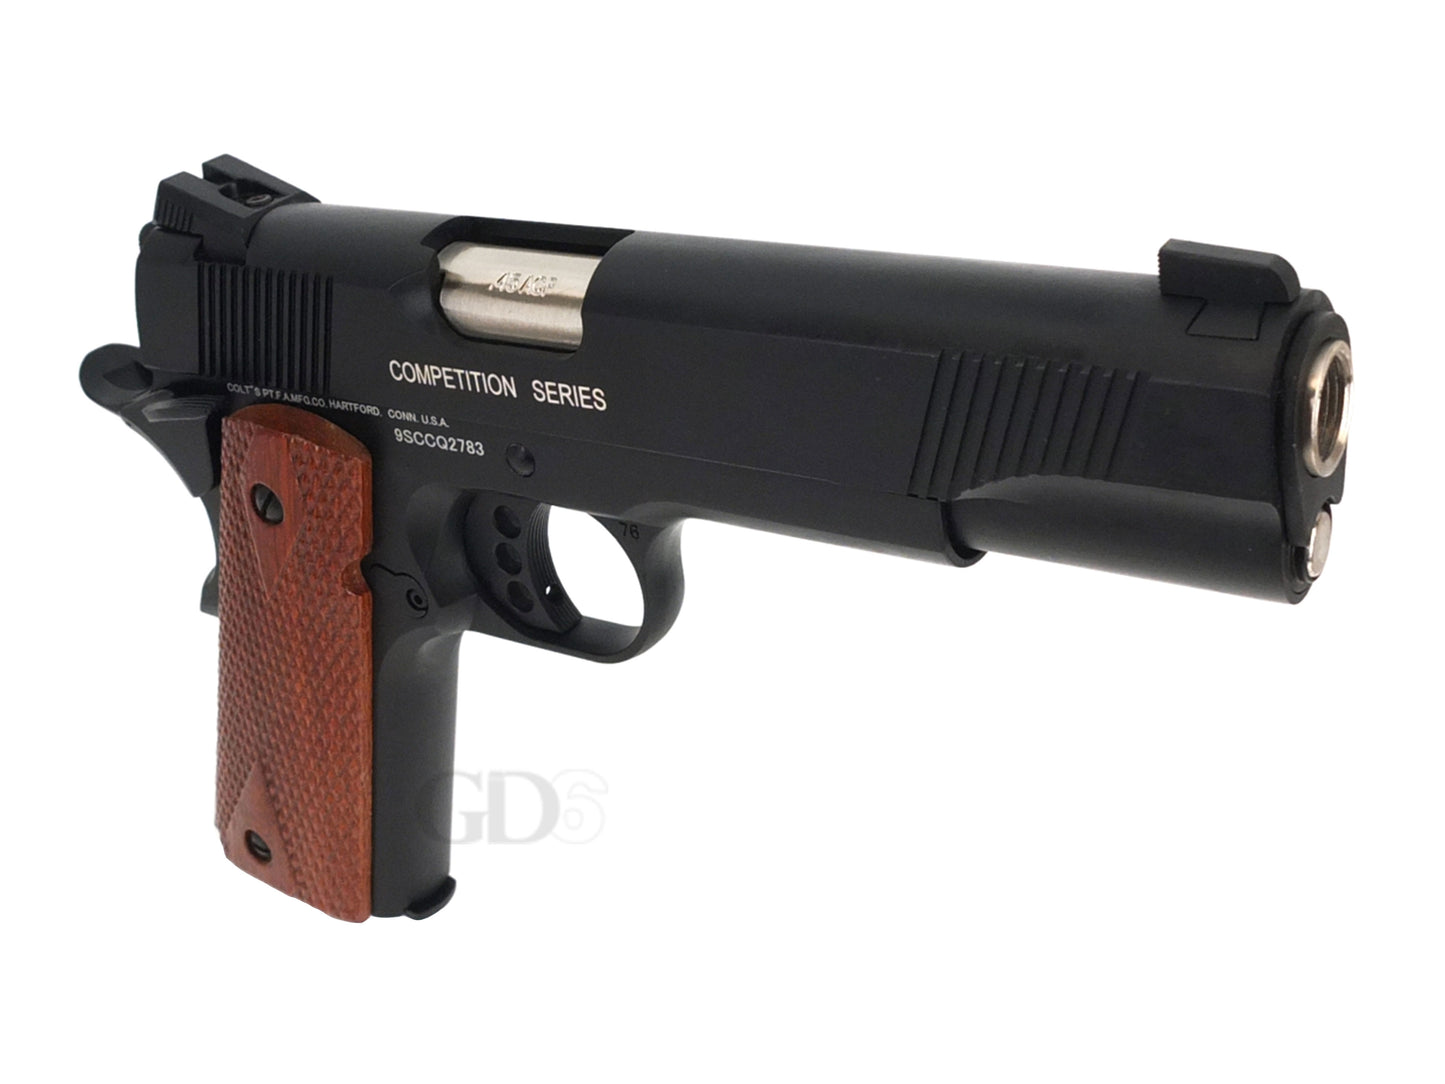 ARMY Colt Competition Government S70 .45 コルト コンペ ガバメント S70 M1911A1 ガスブローバック ハンドガン メタルパーツ セット.